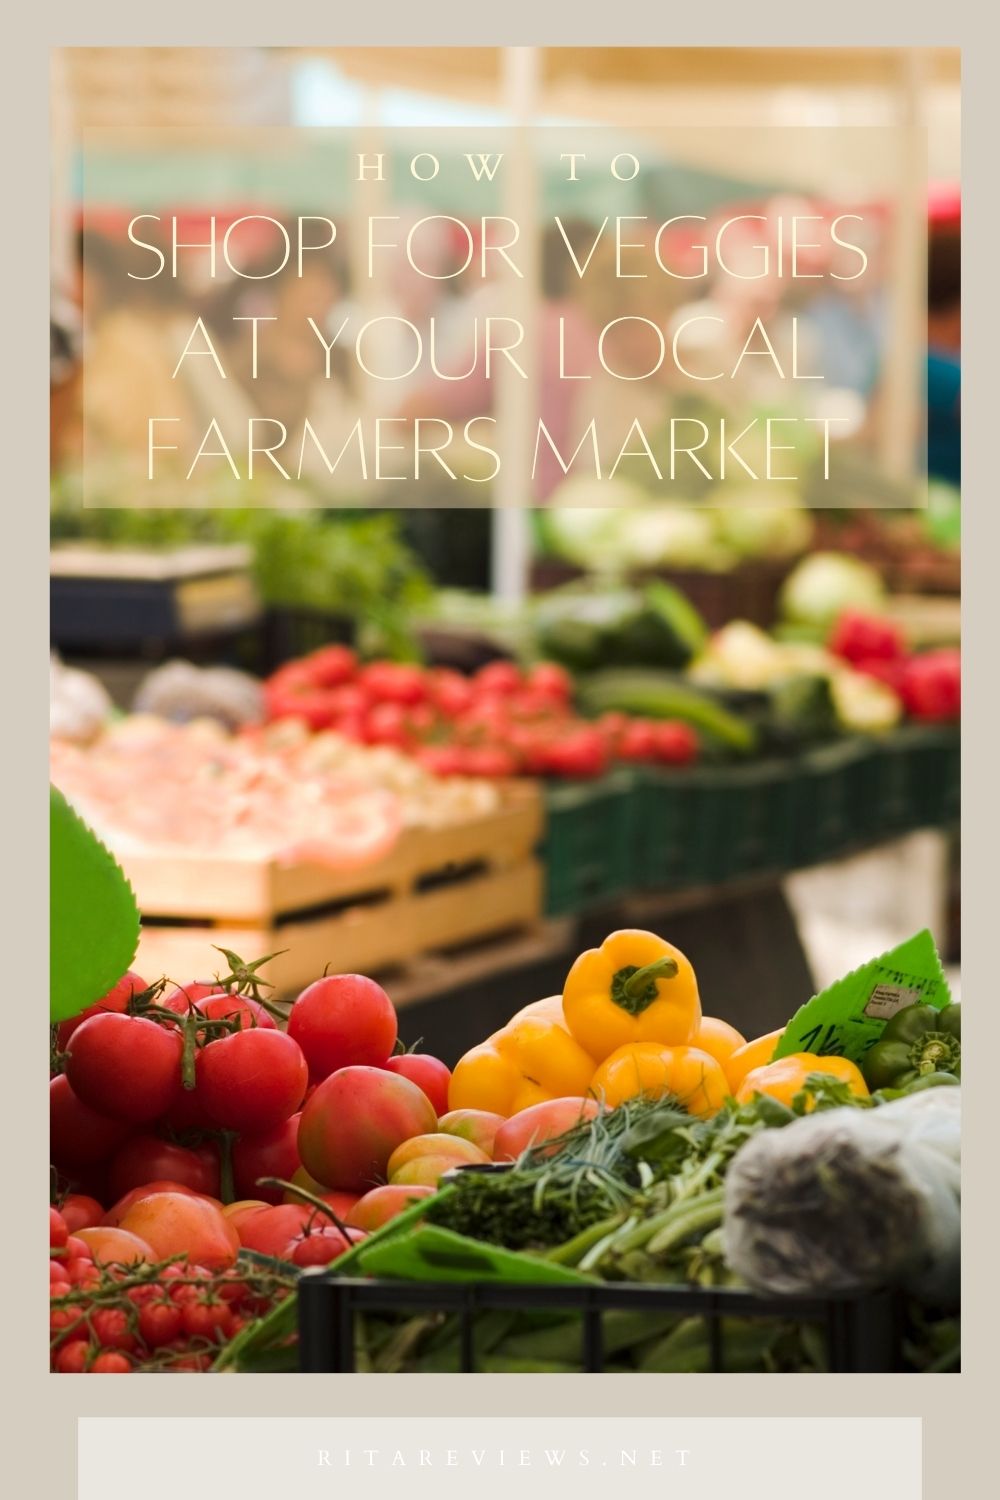 How to Shop for Veggies at Your Local Farmers Market